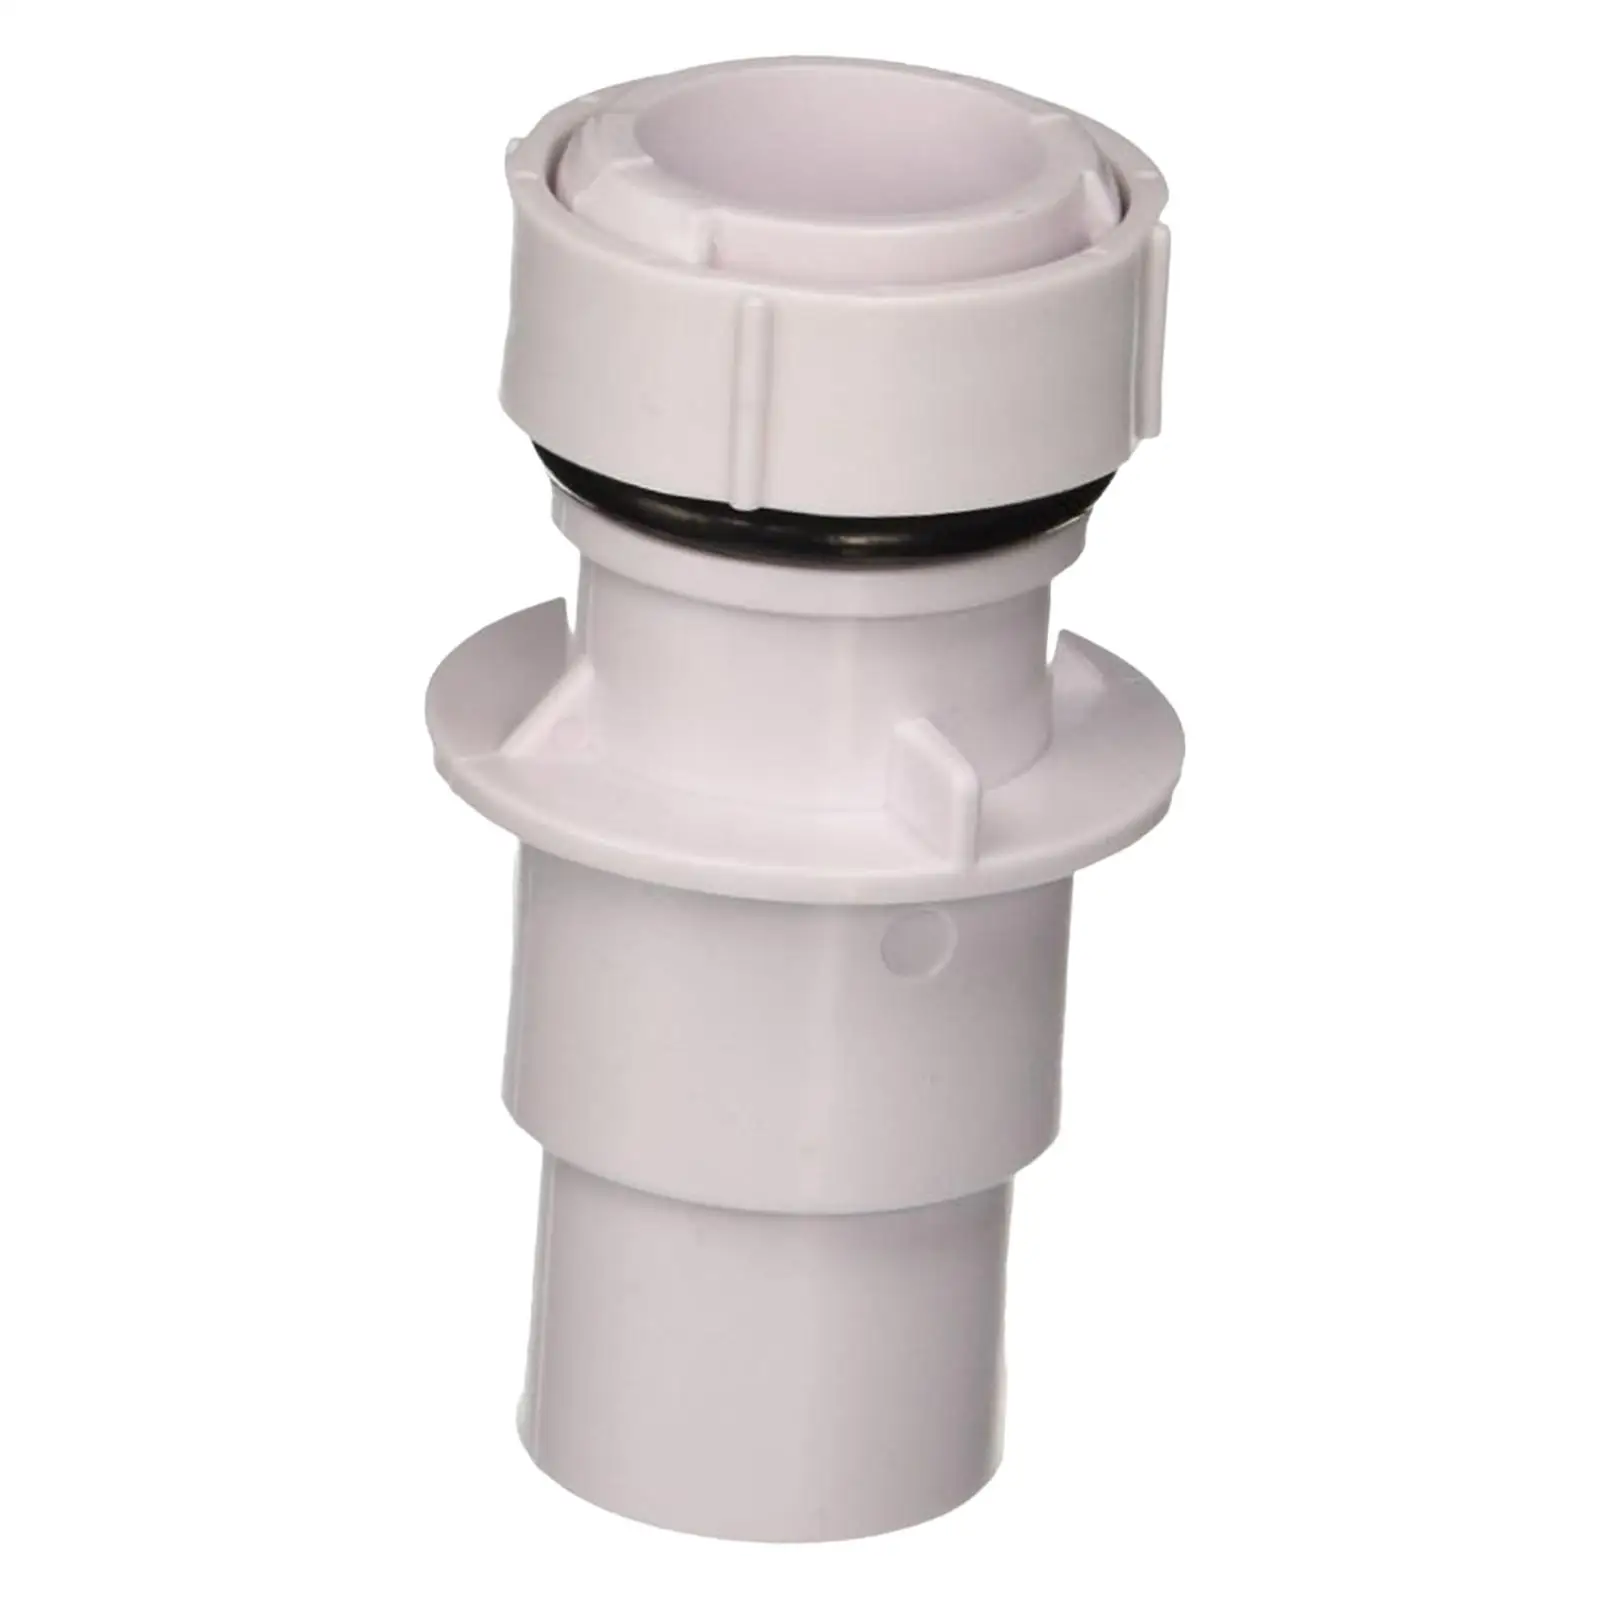 above Ground Pool Hose Coupling Durable Quick Connect Lightweight Pool Fittings for Filter Skimmer Plumbing Connection Supplies